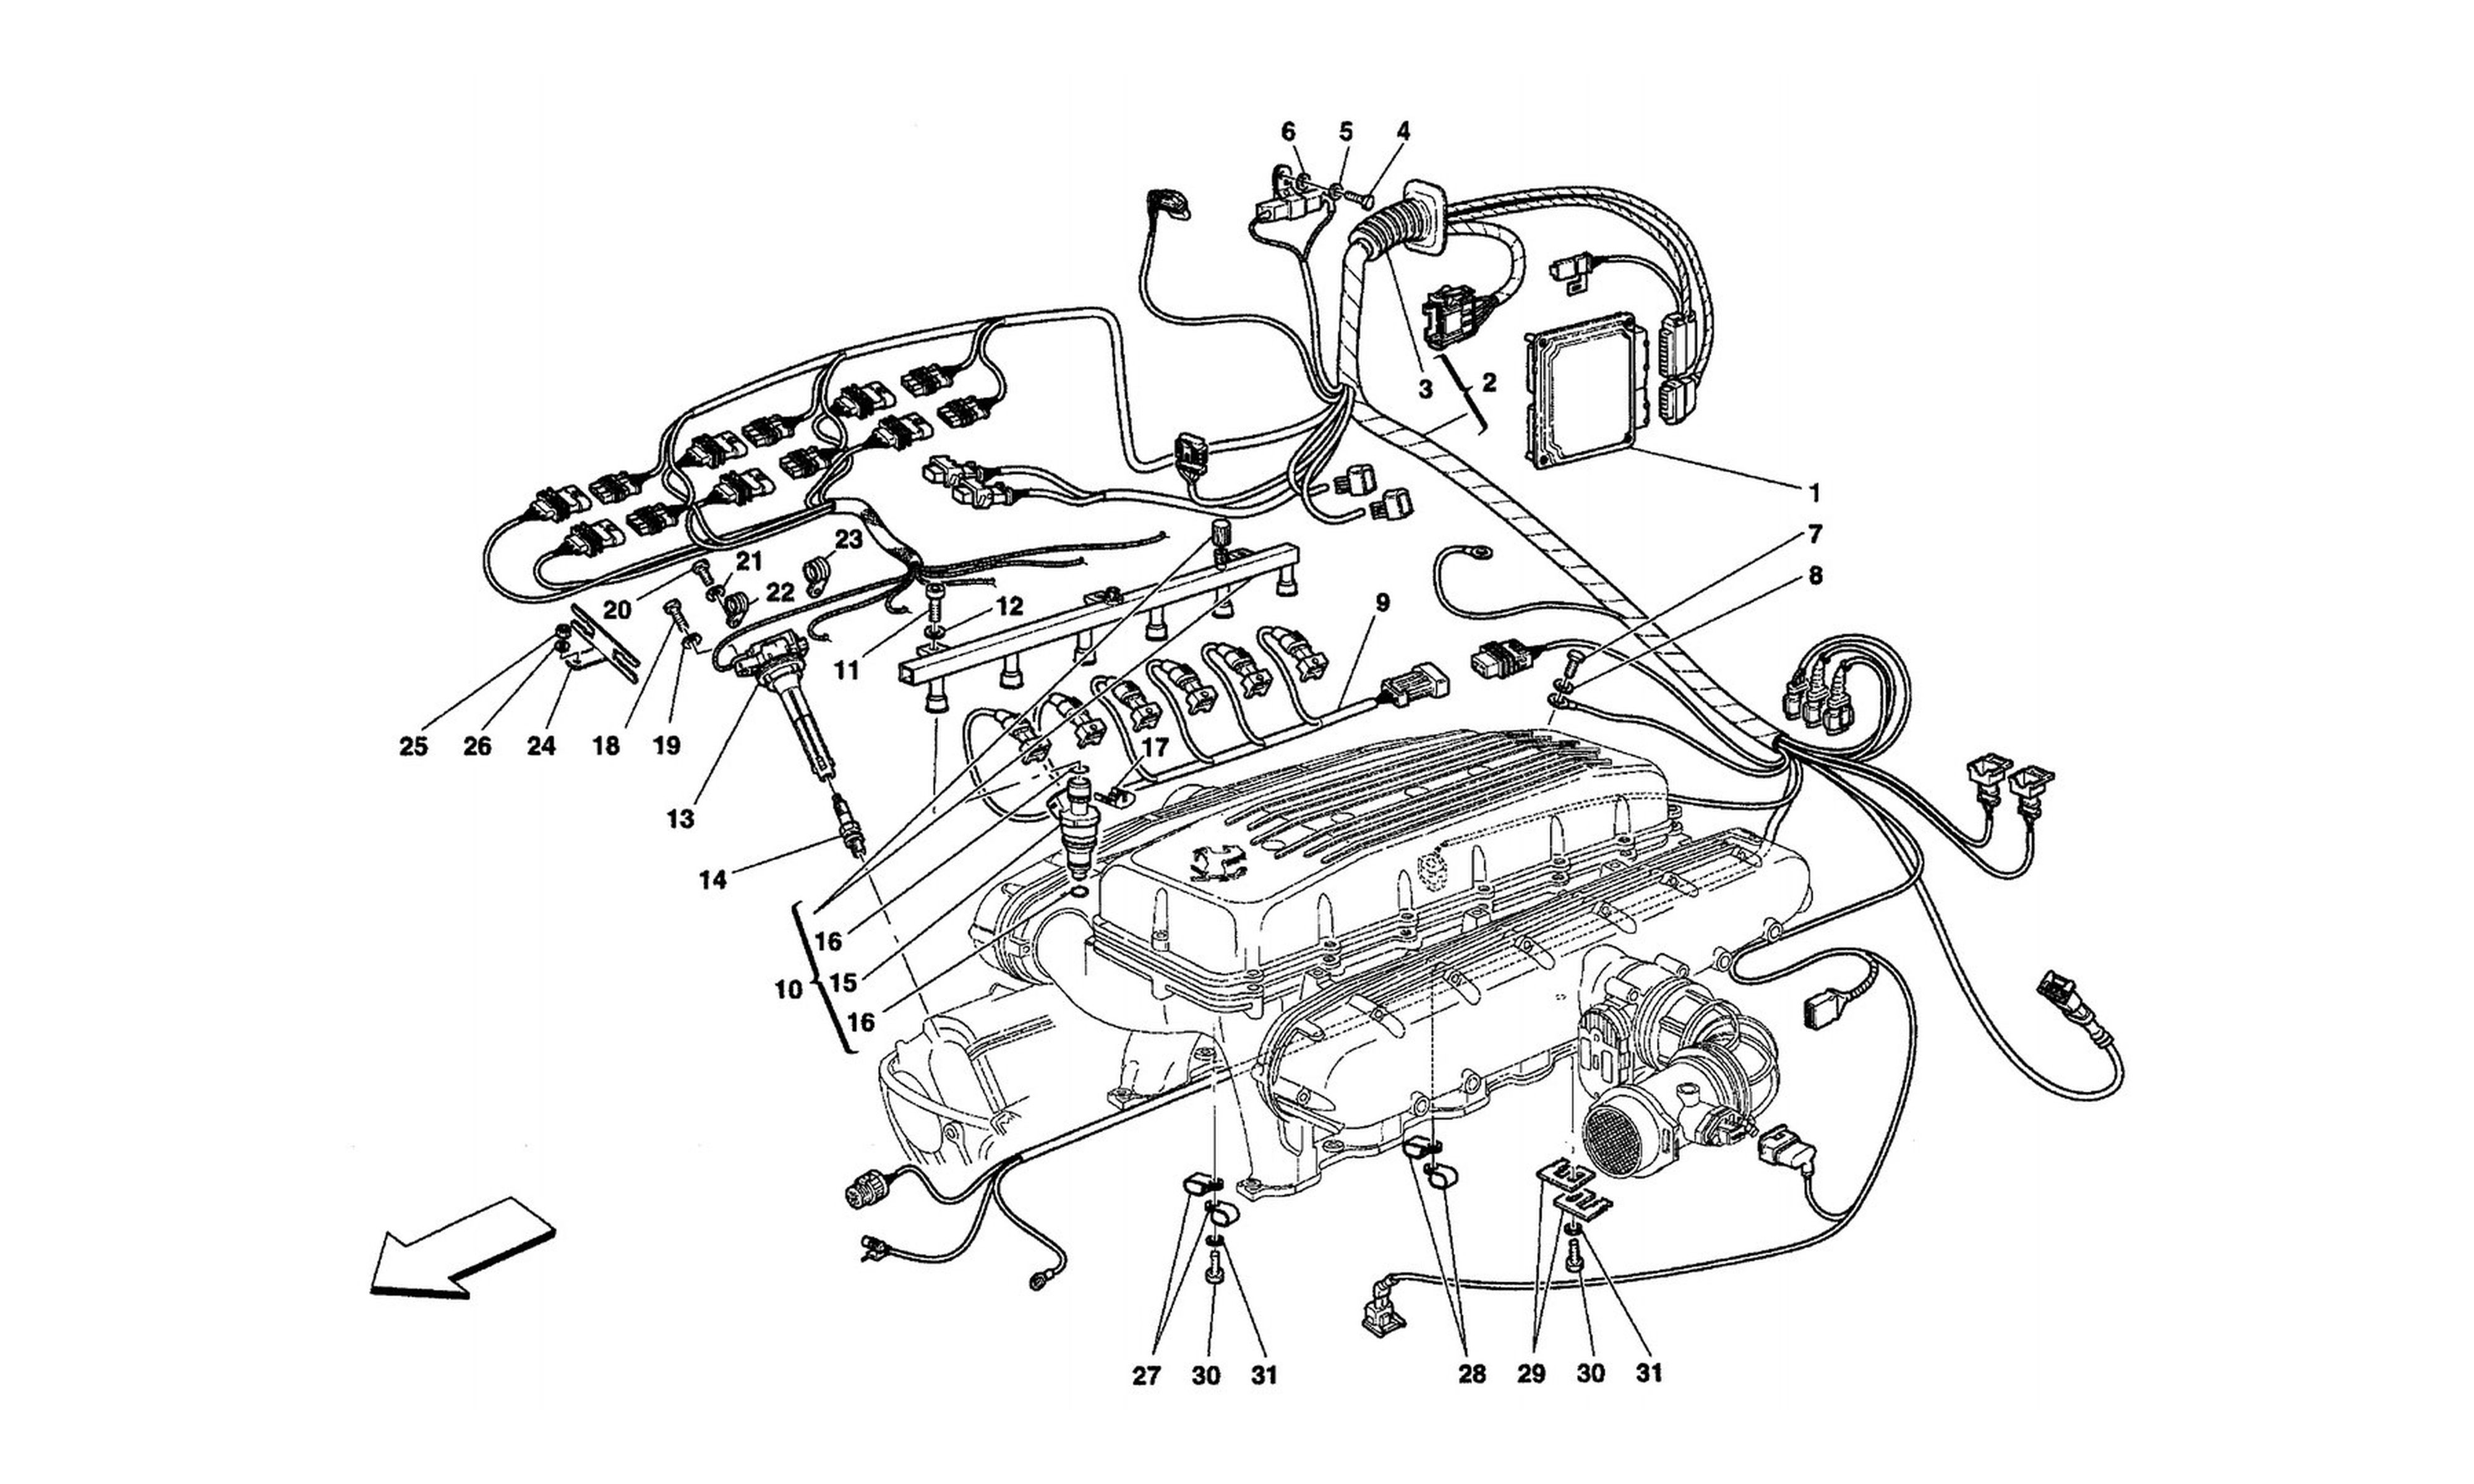 Schematic: Injection - Ignition Device